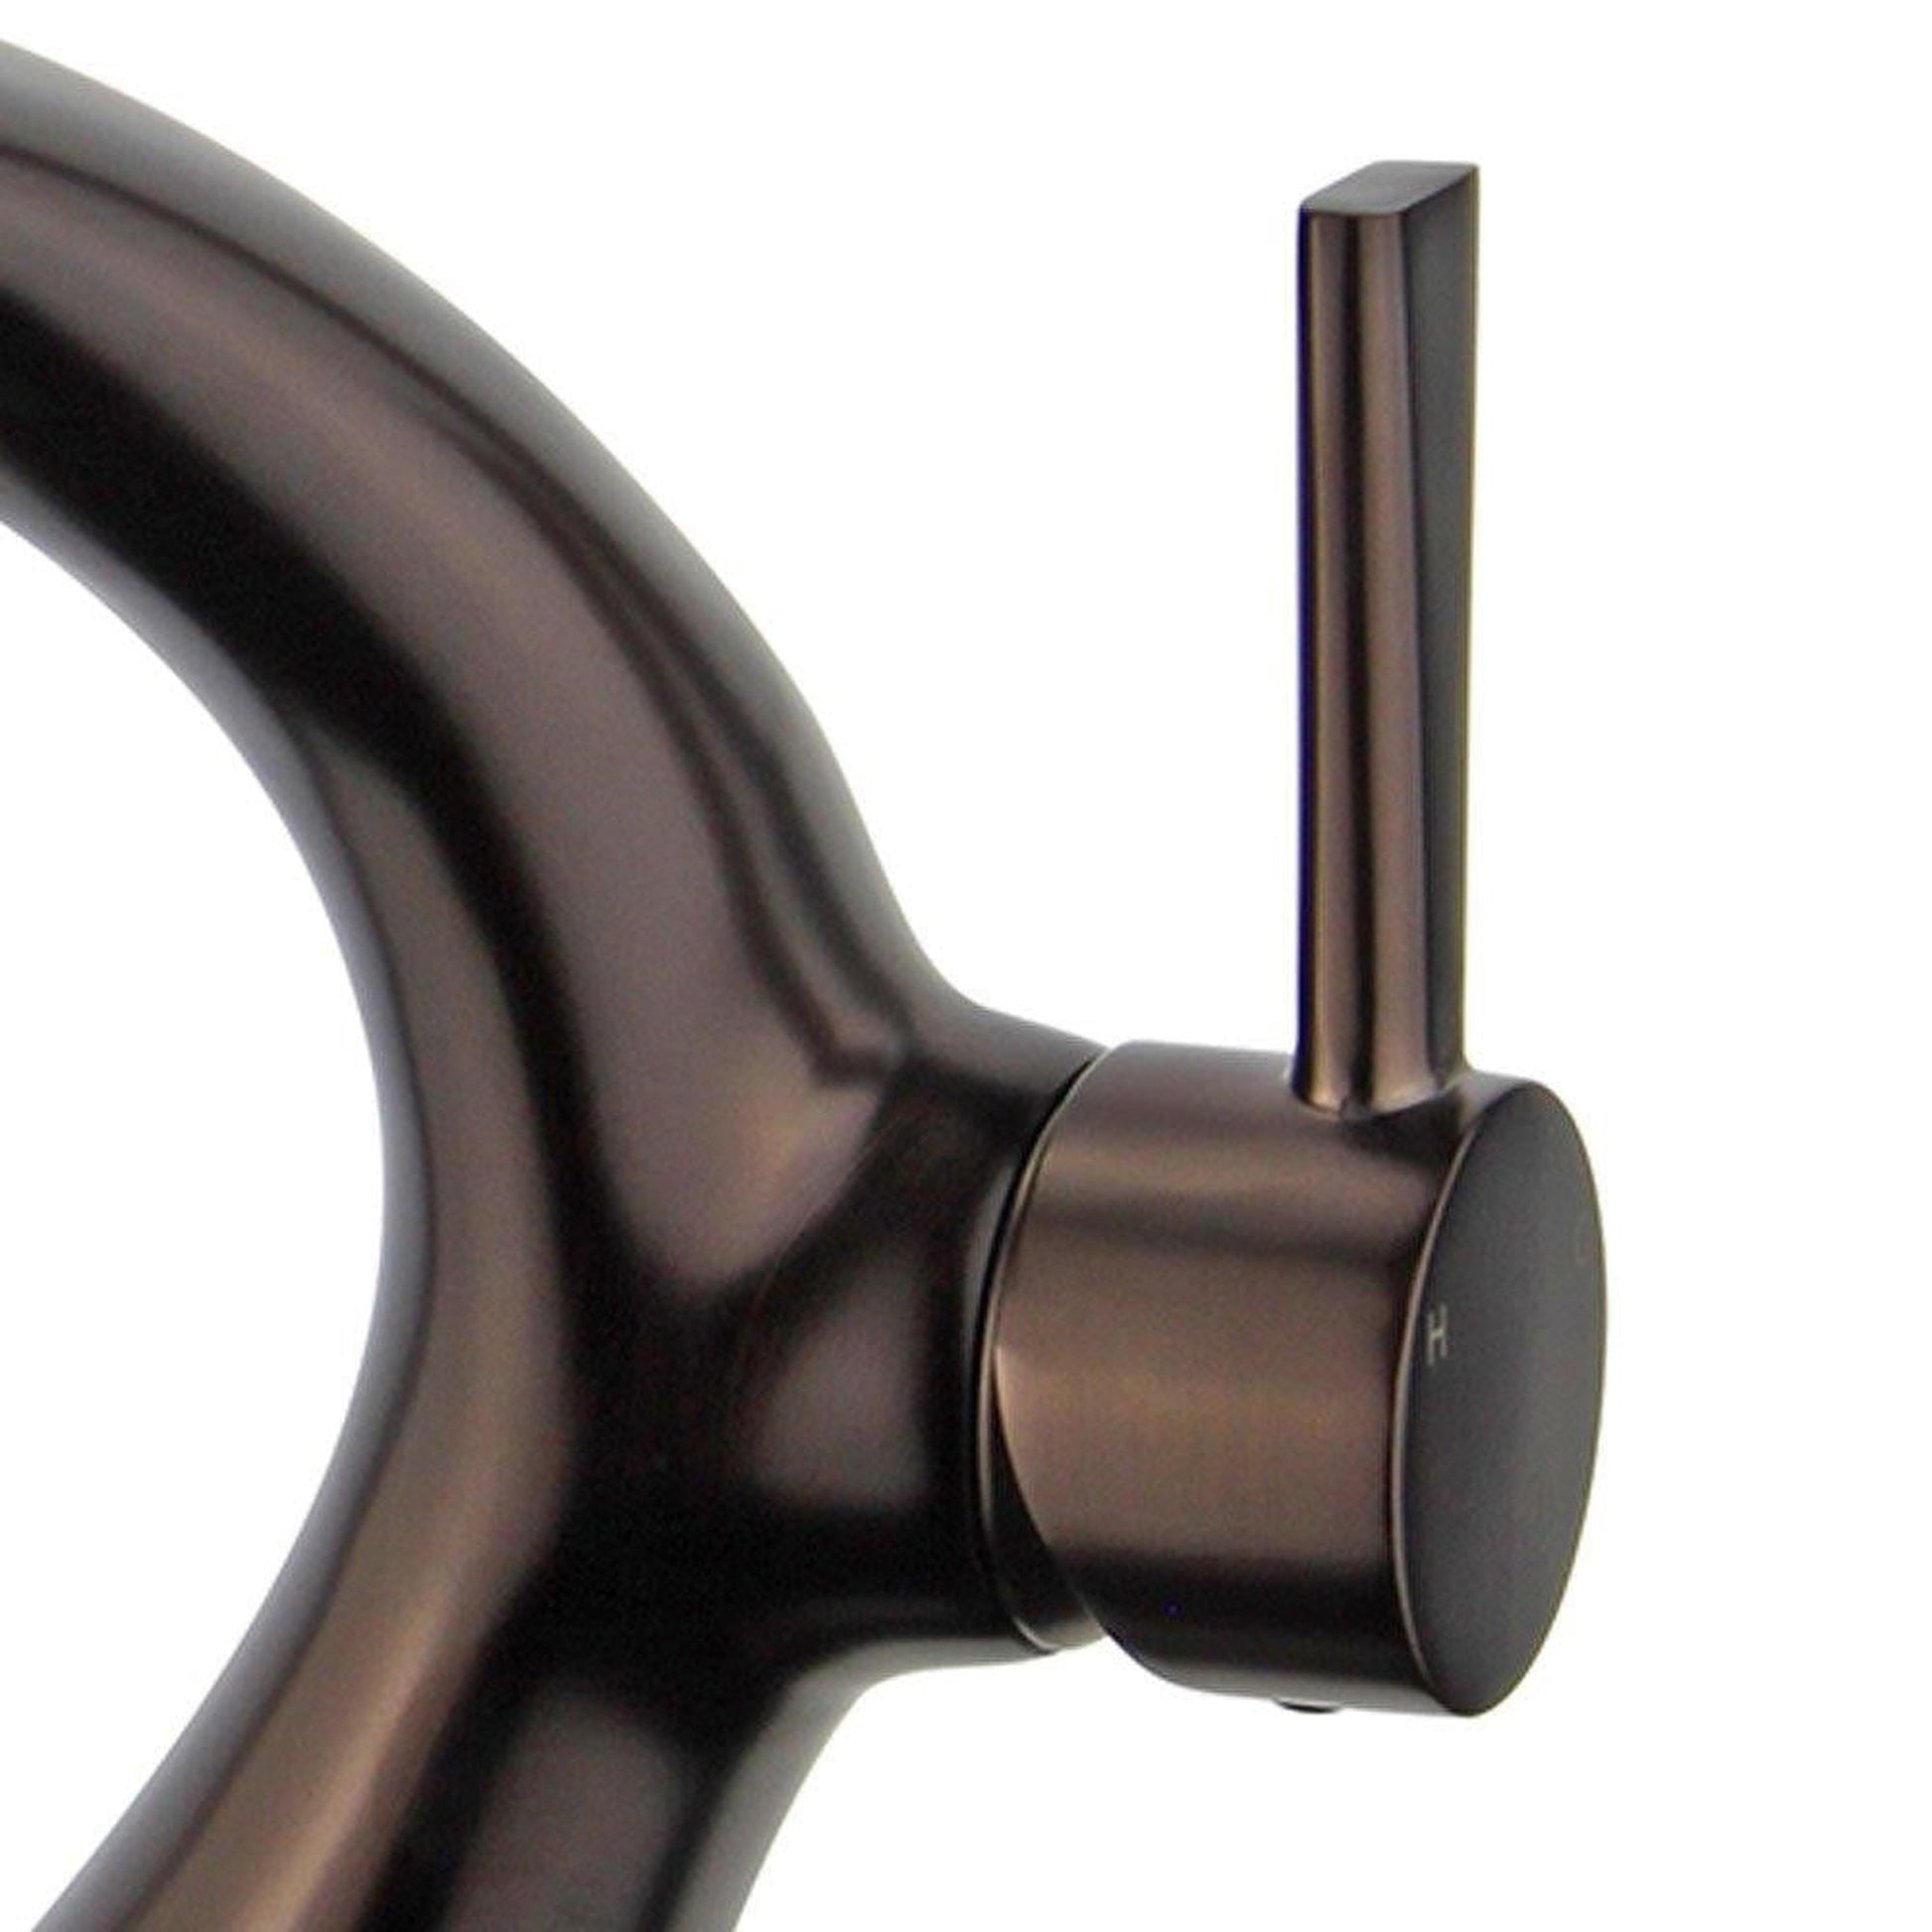 Bellaterra Home Bilbao 7" Single-Hole and Single Handle Oil Rubbed Bronze Bathroom Faucet With Overflow Drain